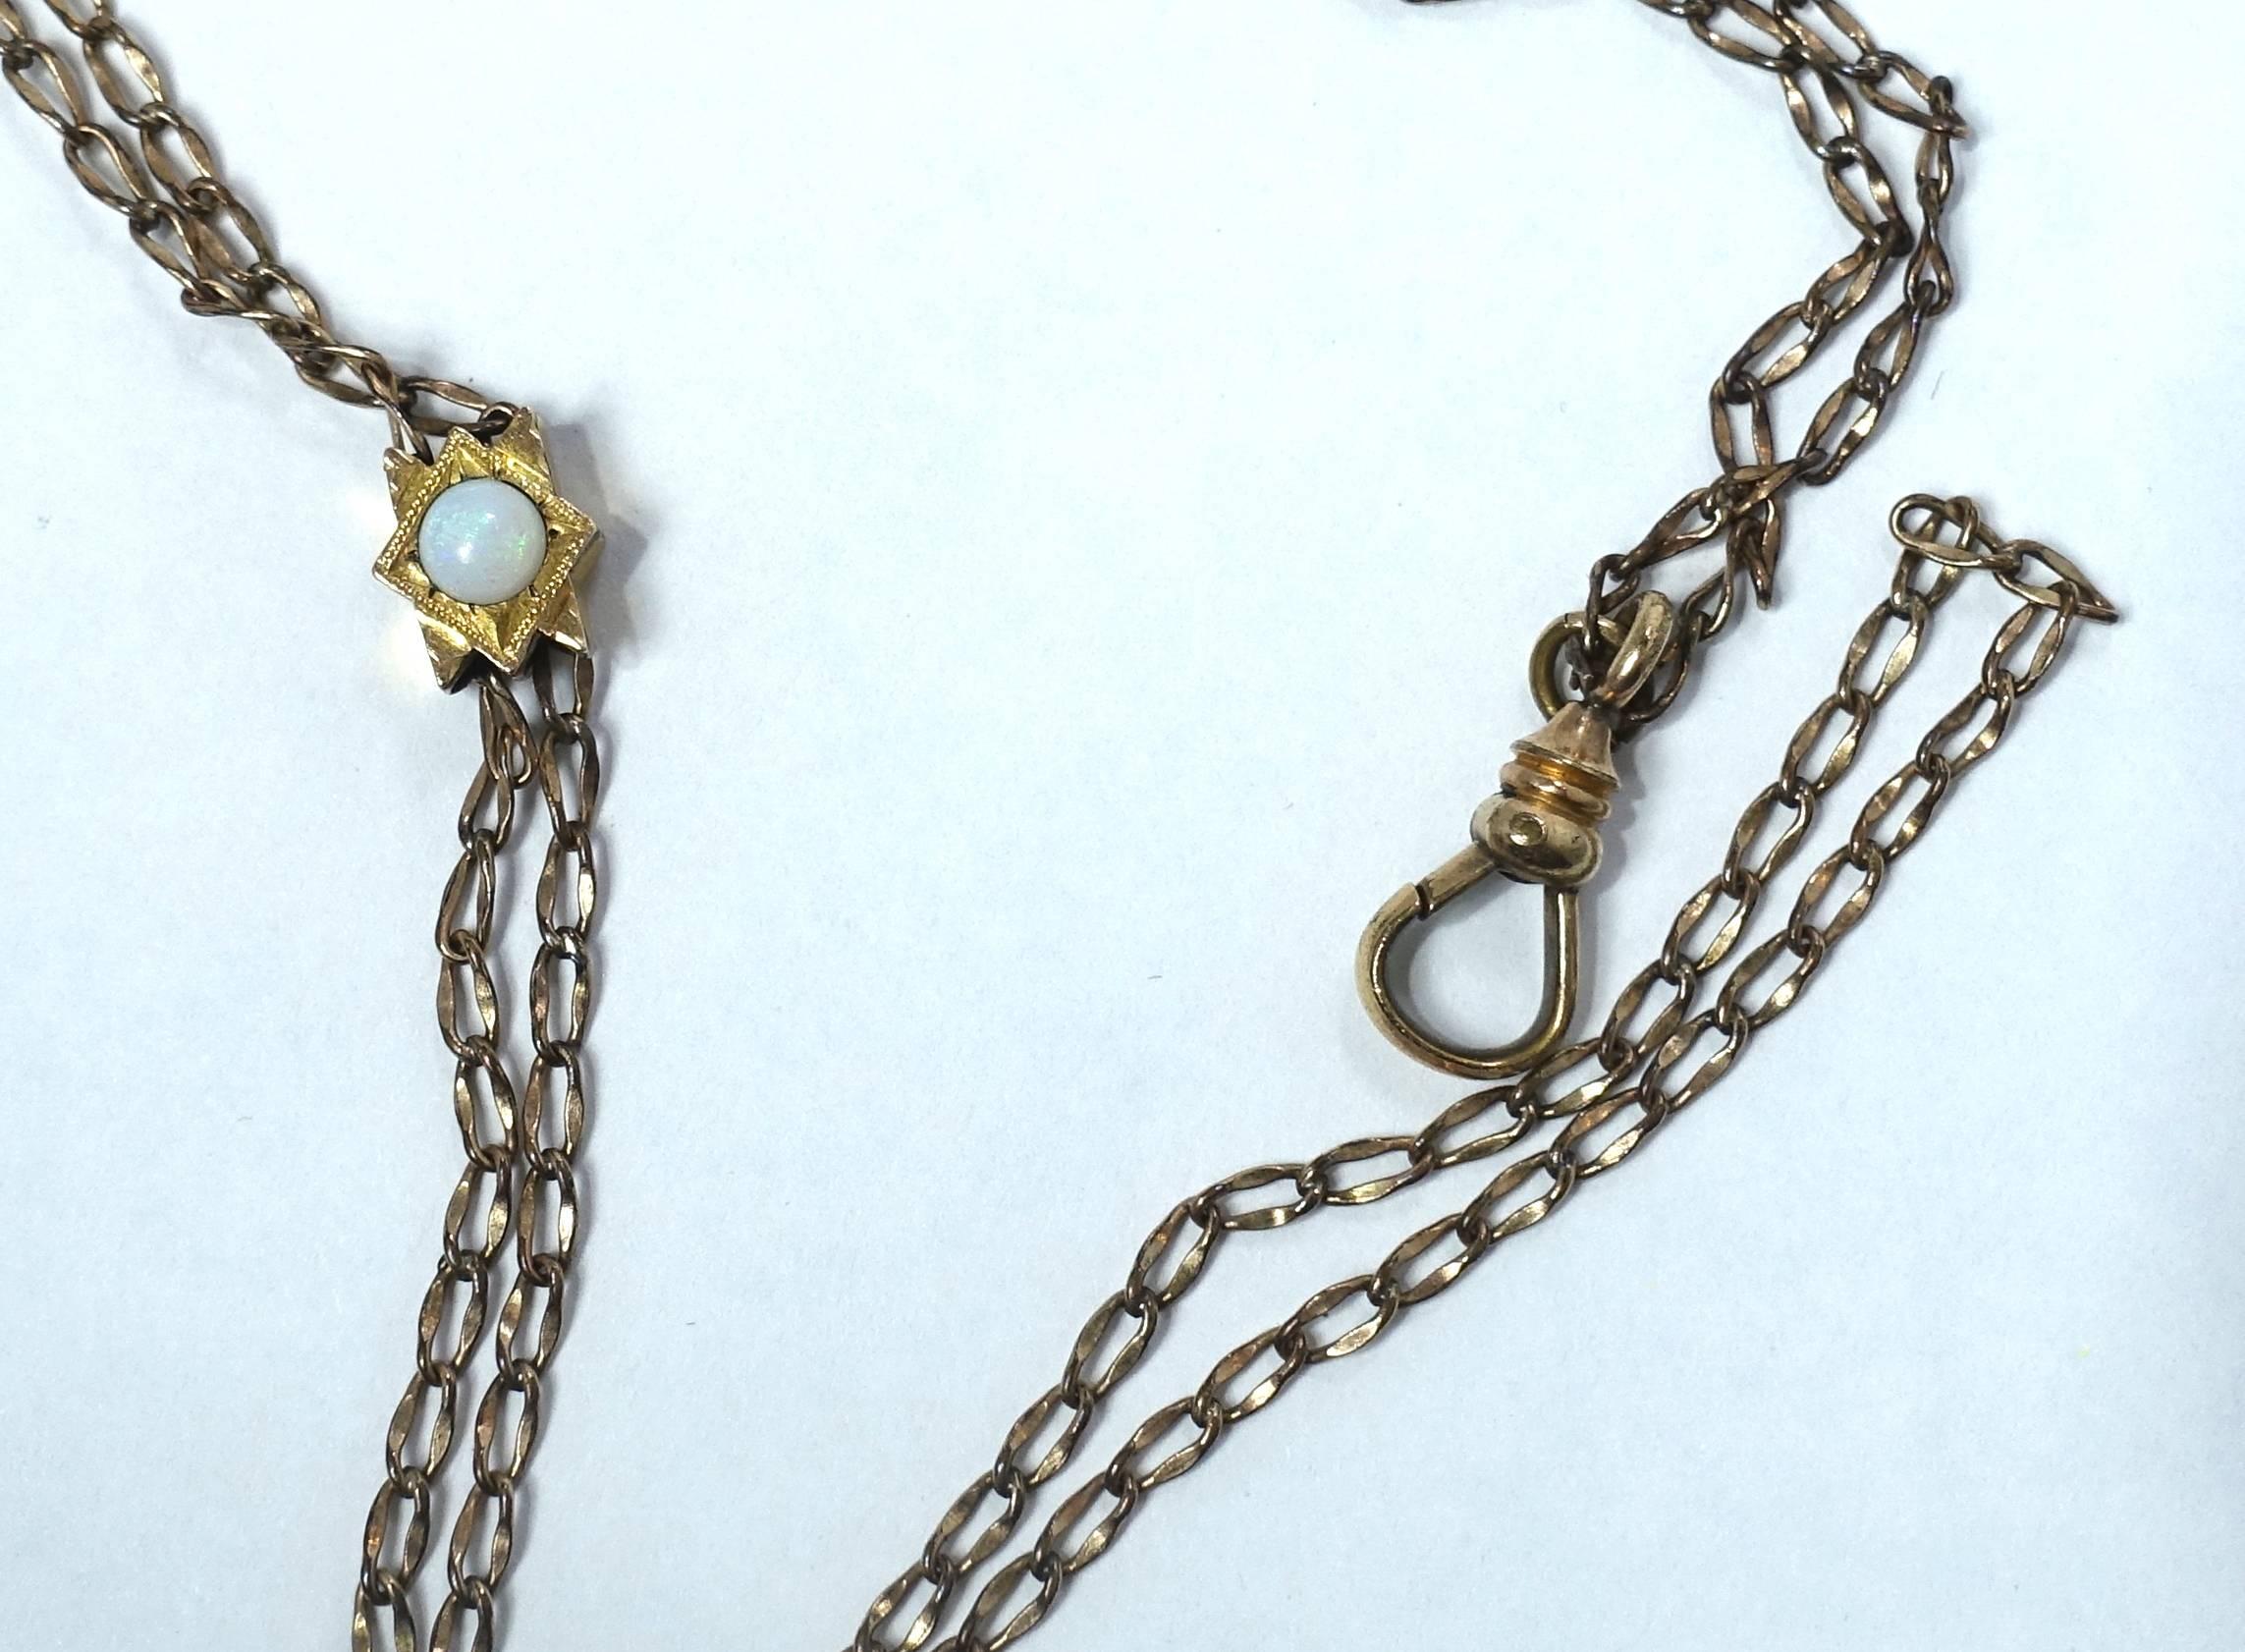 This Victorian 1800s gold filled watch FOB and chain can be worn as a necklace.  It features a slide with opal accents. It is signed “HHB & Co.”  The necklace measures 25” long and the slide is 3/8” x 1/4”.  It is in excellent condition.